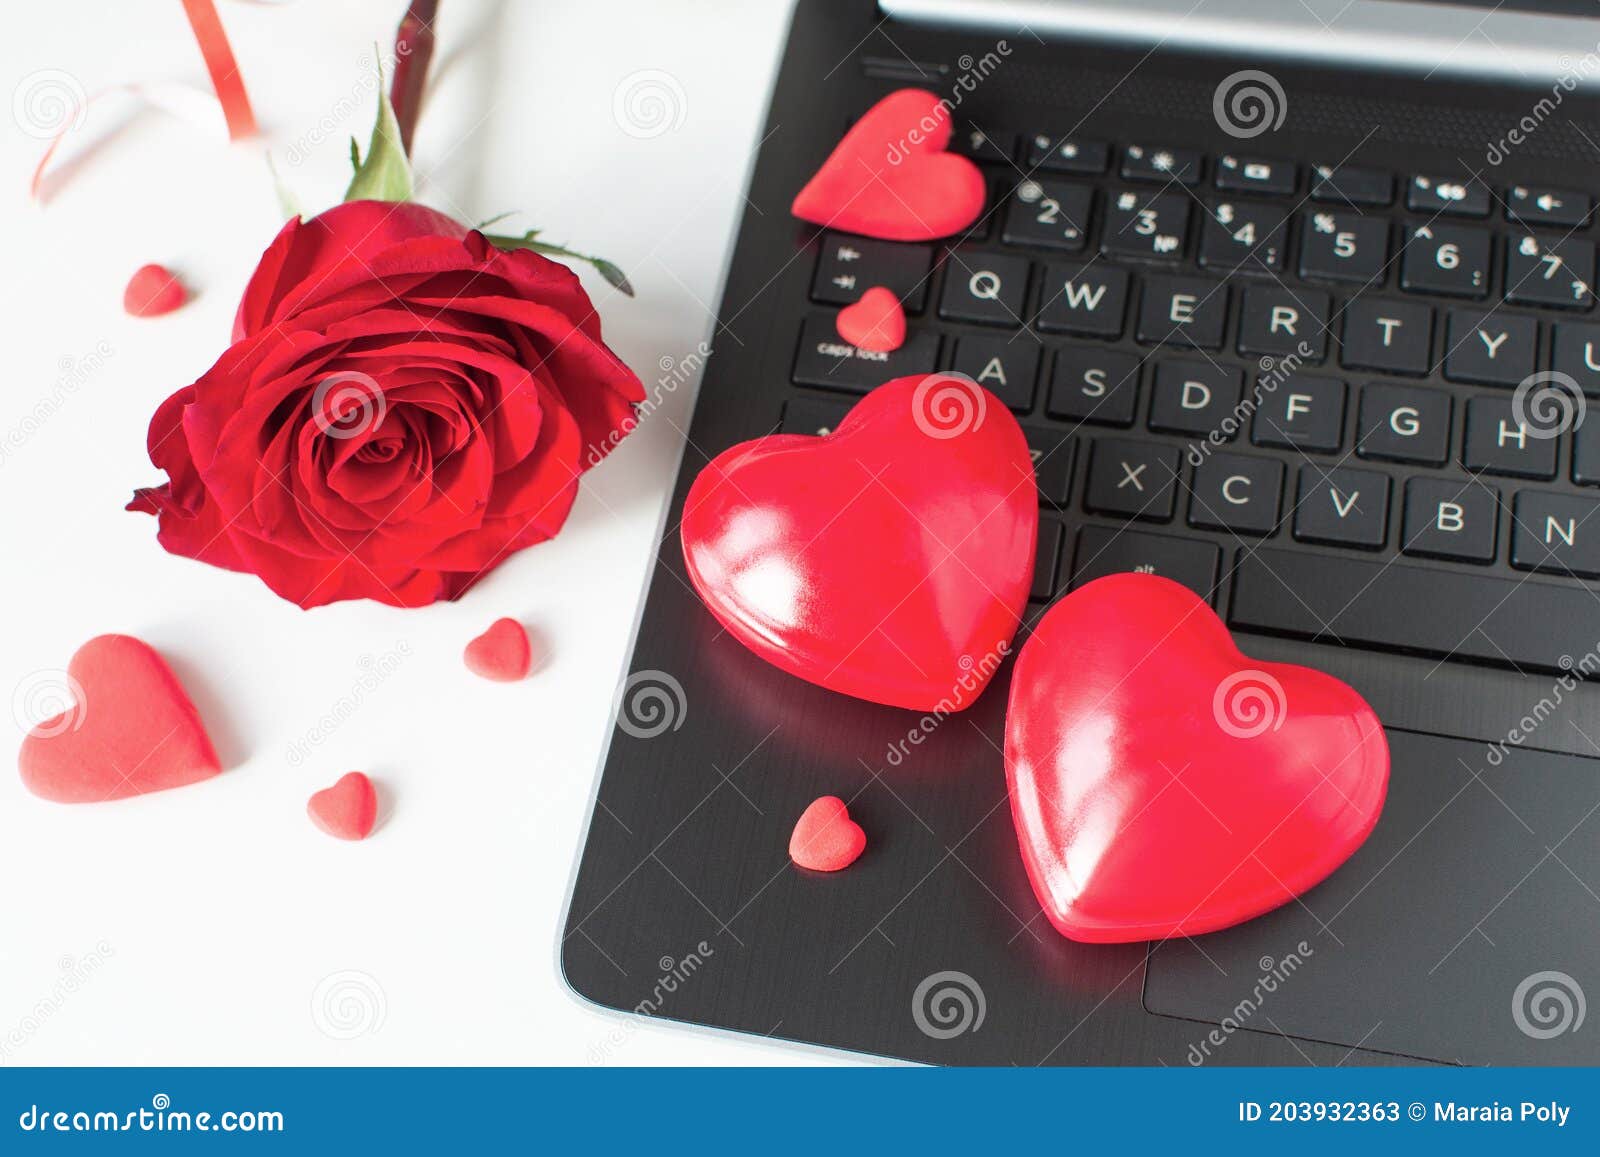 Valentine Day Online Shopping. Online Communication, Virtual Love. Laptop,  Red Hearts, Red Rose. Romantic Shopping Wedding, Women Stock Image - Image  of romantic, marketing: 203932363